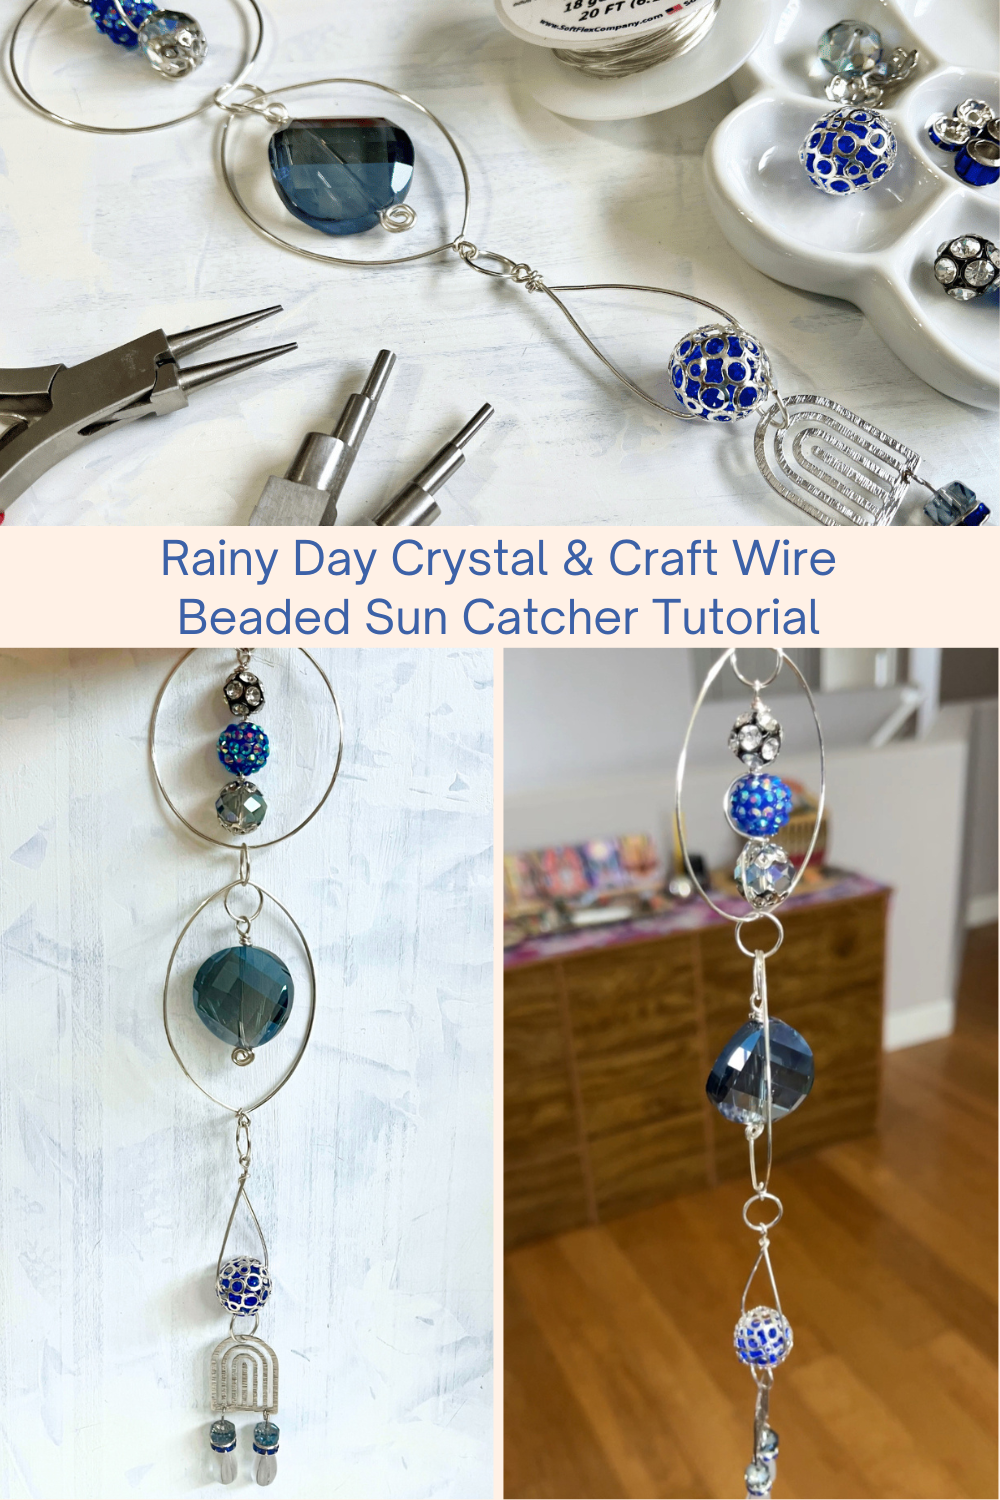 Rainy Day Crystal & Craft Wire Beaded Sun Catcher Tutorial Collage